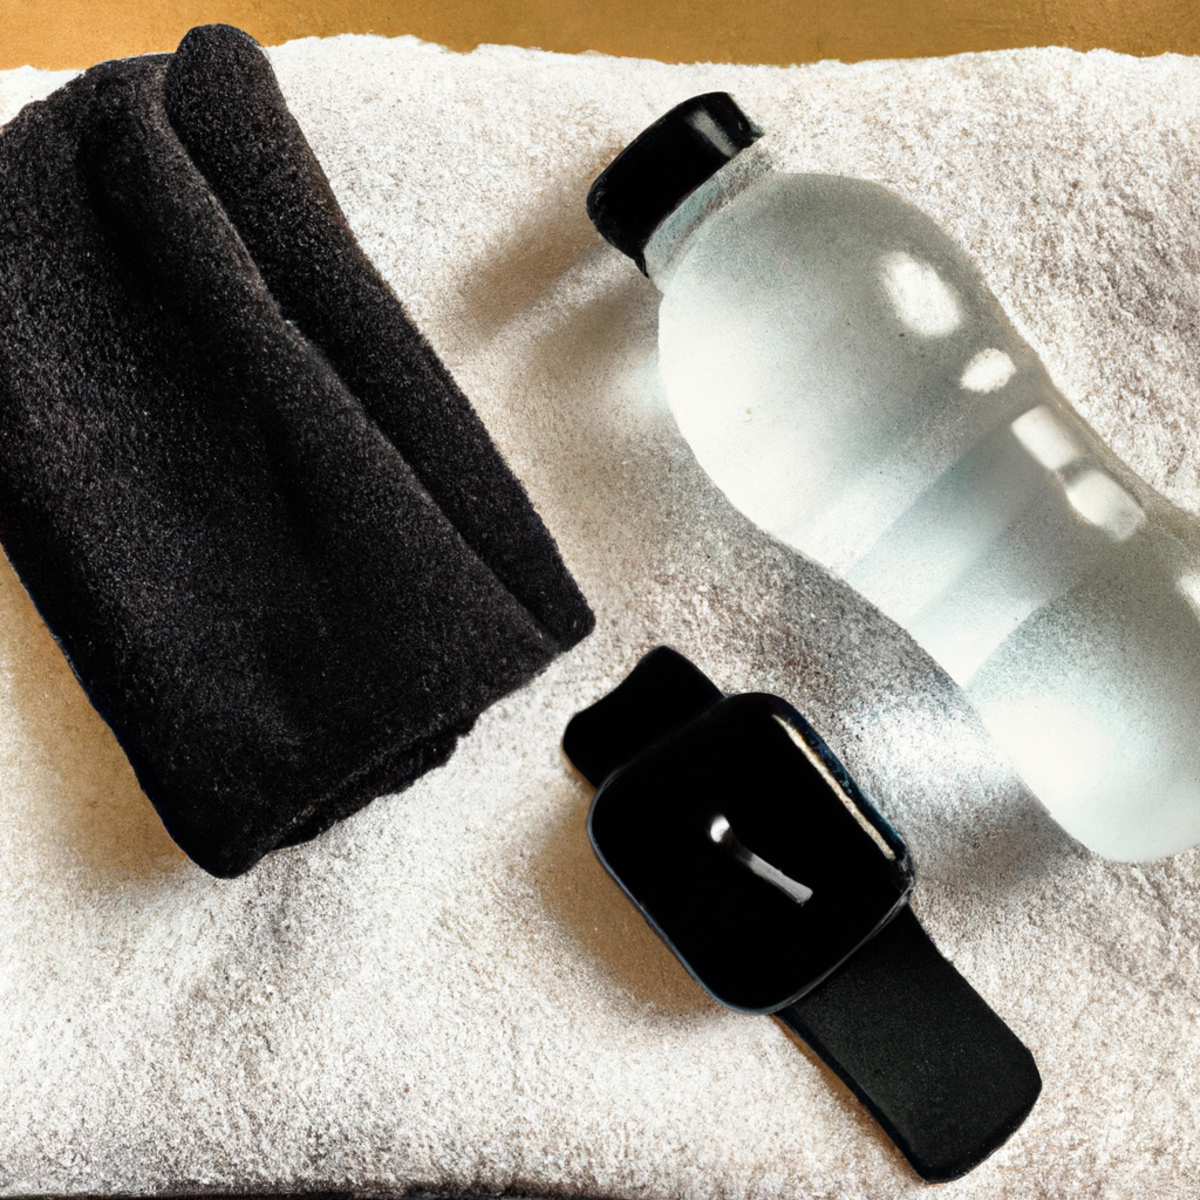 The photo showcases the importance of Apps and Wearables in achieving fitness goals. It features a sleek fitness tracker watch, wireless earbuds, and a water bottle on a gym towel. The watch displays heart rate and step count, while the earbuds indicate the use of music or fitness coach guidance. The half-empty water bottle signifies a dedicated workout session. With a neatly folded gym towel, the user shows organization and focus. The blurred background emphasizes the significance of these Apps and Wearables.